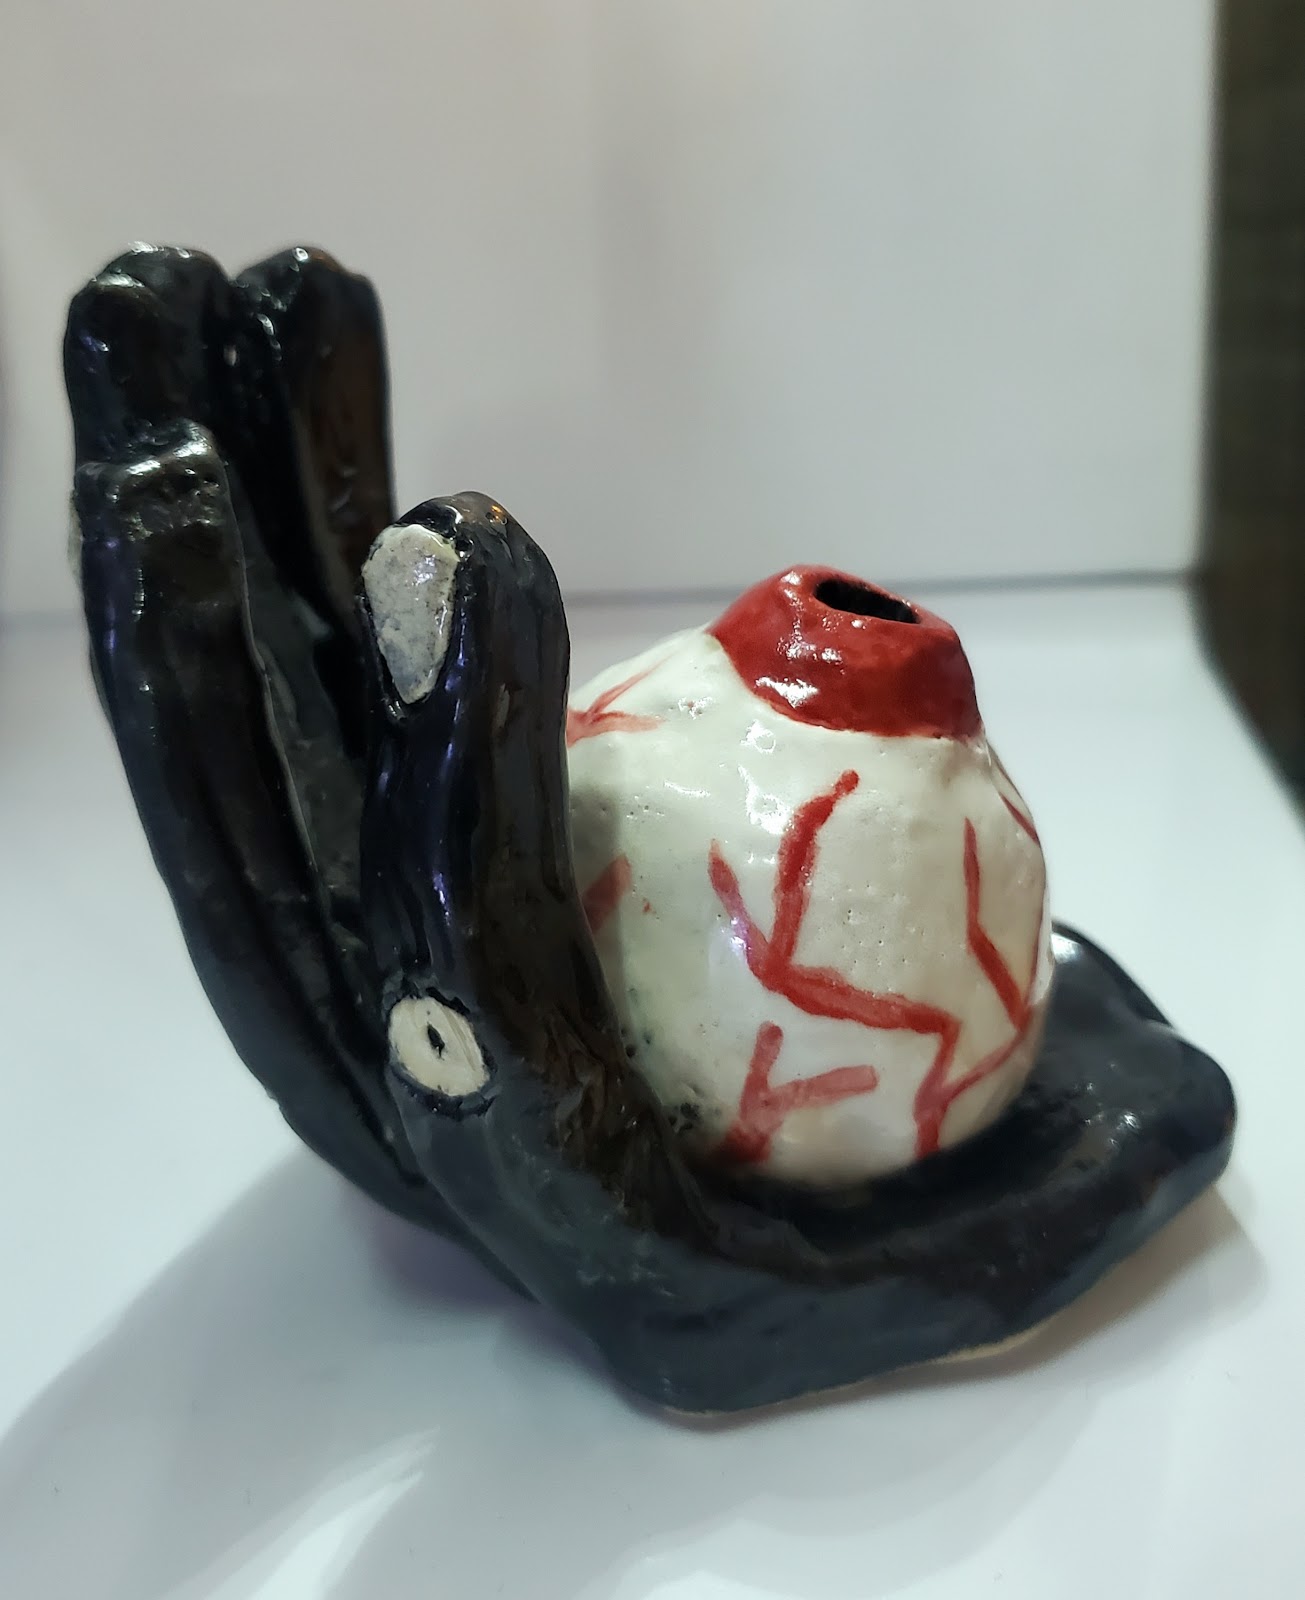 A ceramic of a black hand holding an eyeball that is red with lots of veins.